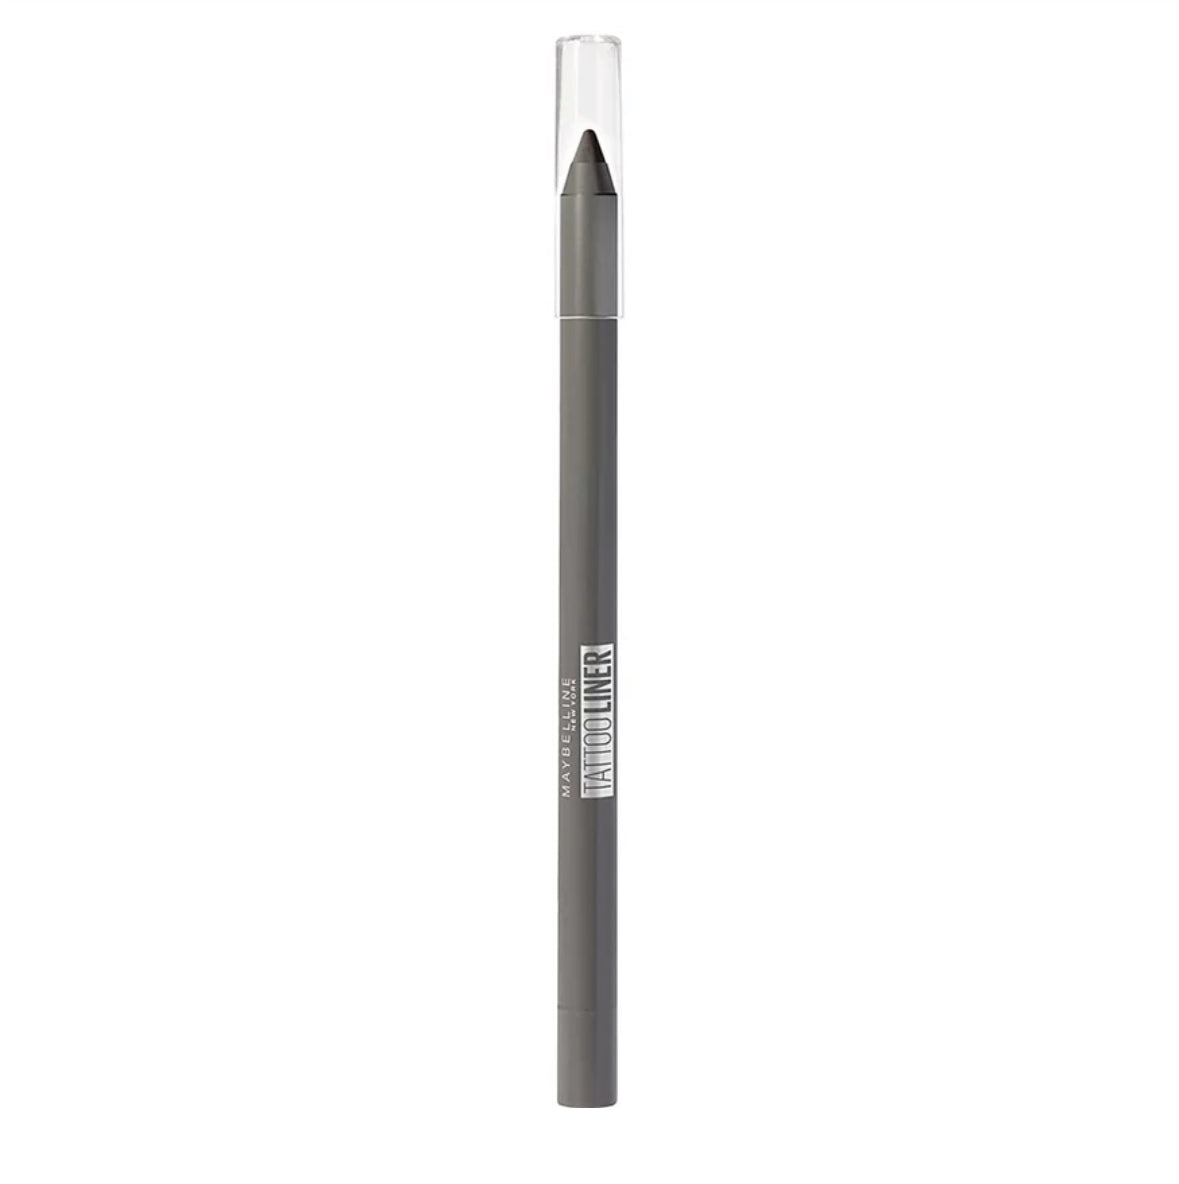 Intense 901 Traboulsi Cosmetics Liner Pencil Gel Tattoo – Charcoal Maybelline